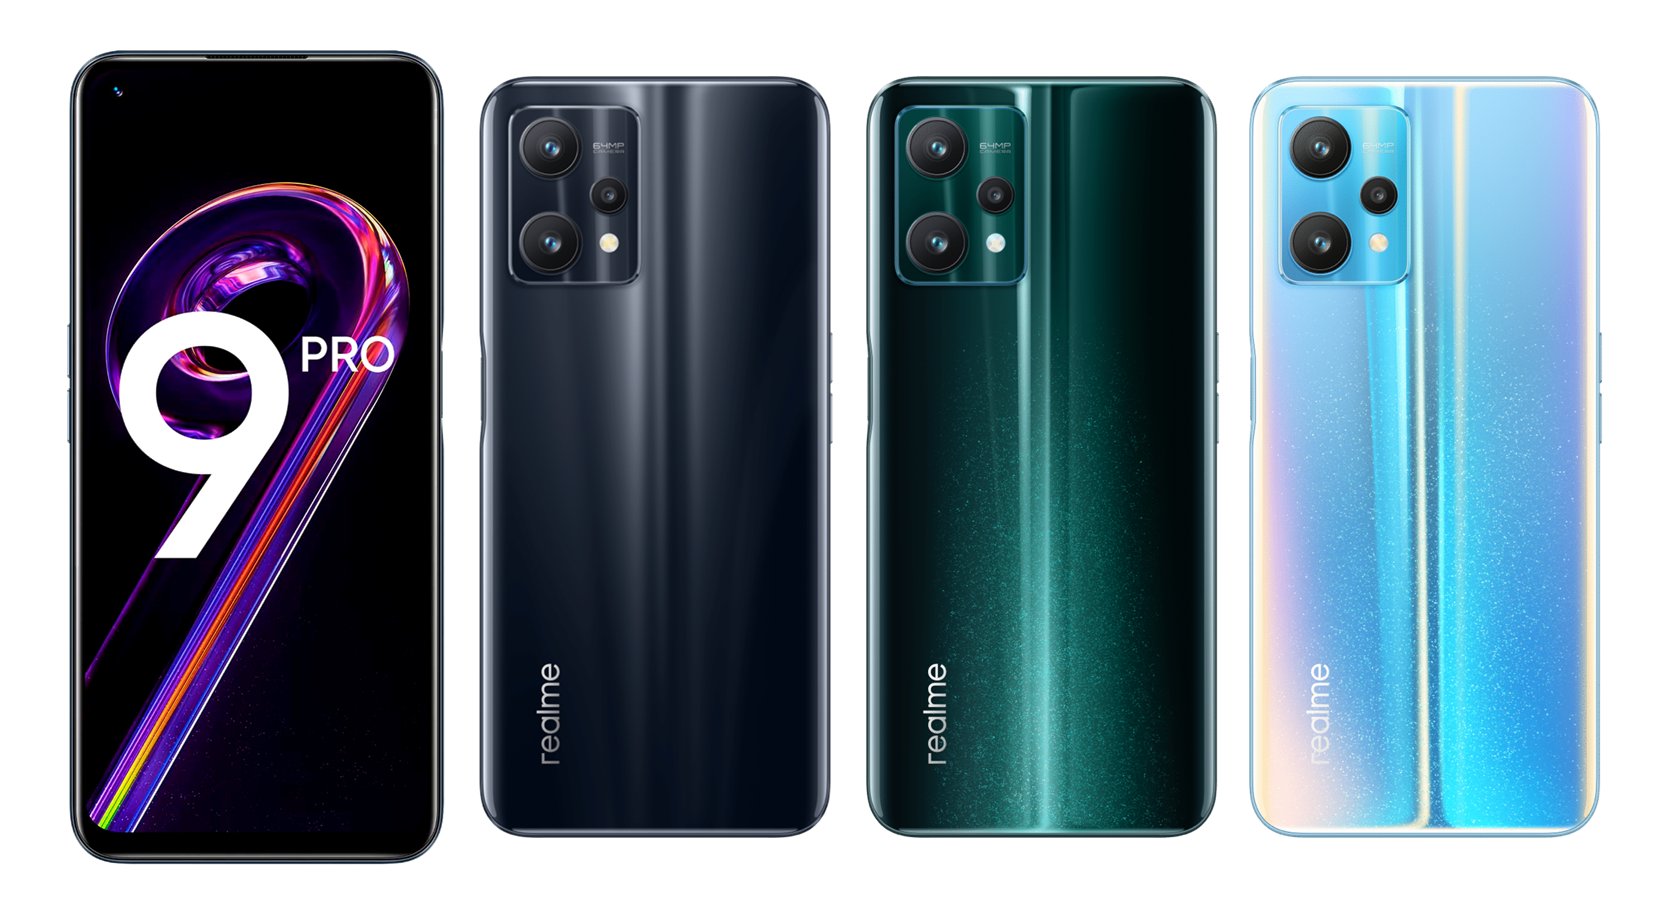 Realme 9 Pro+ Price, Full Specifications